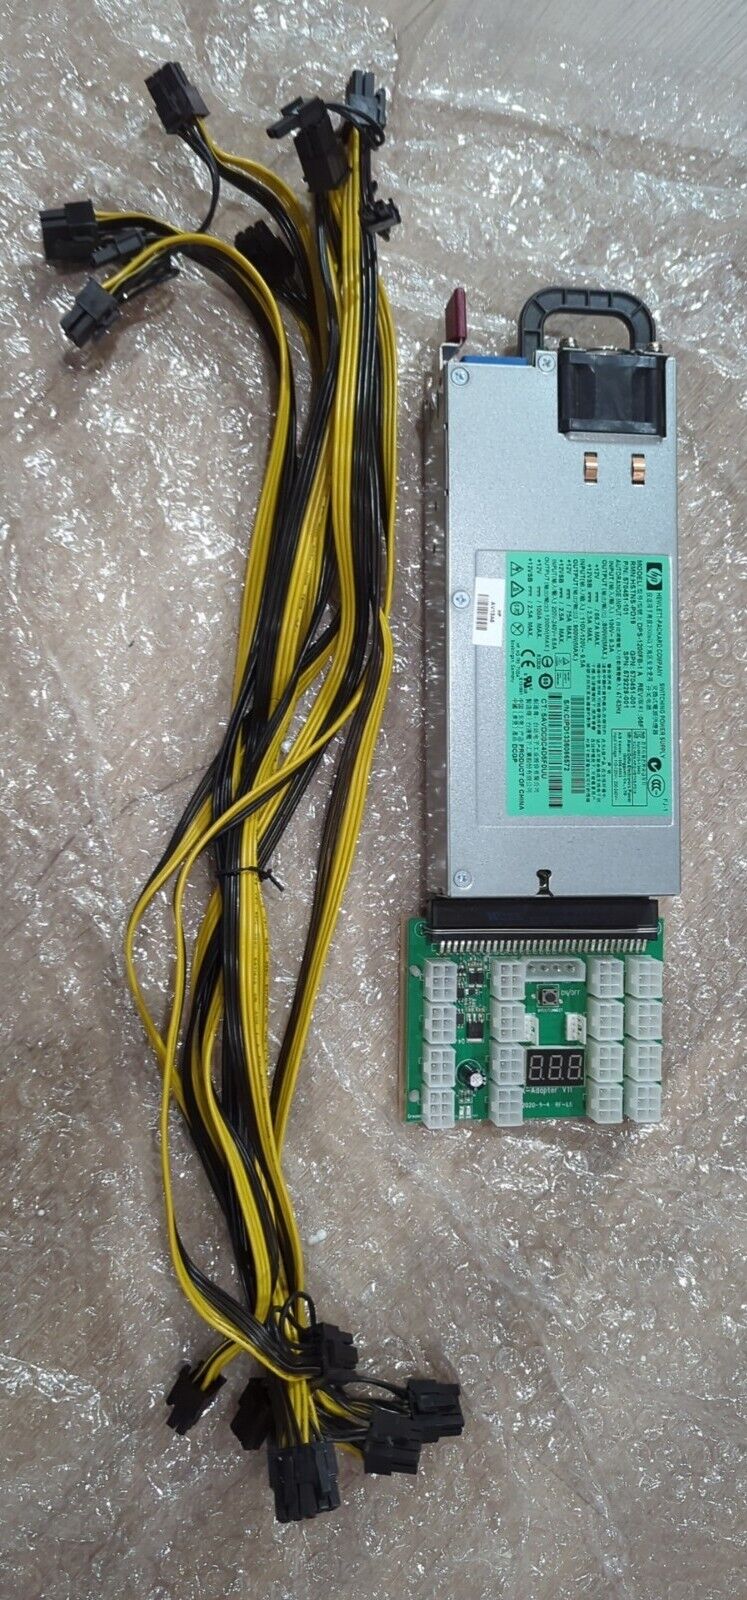 High-Quality 900-1200W HP PSU 94% Energy-Efficiency and Breakout Board: X11 16